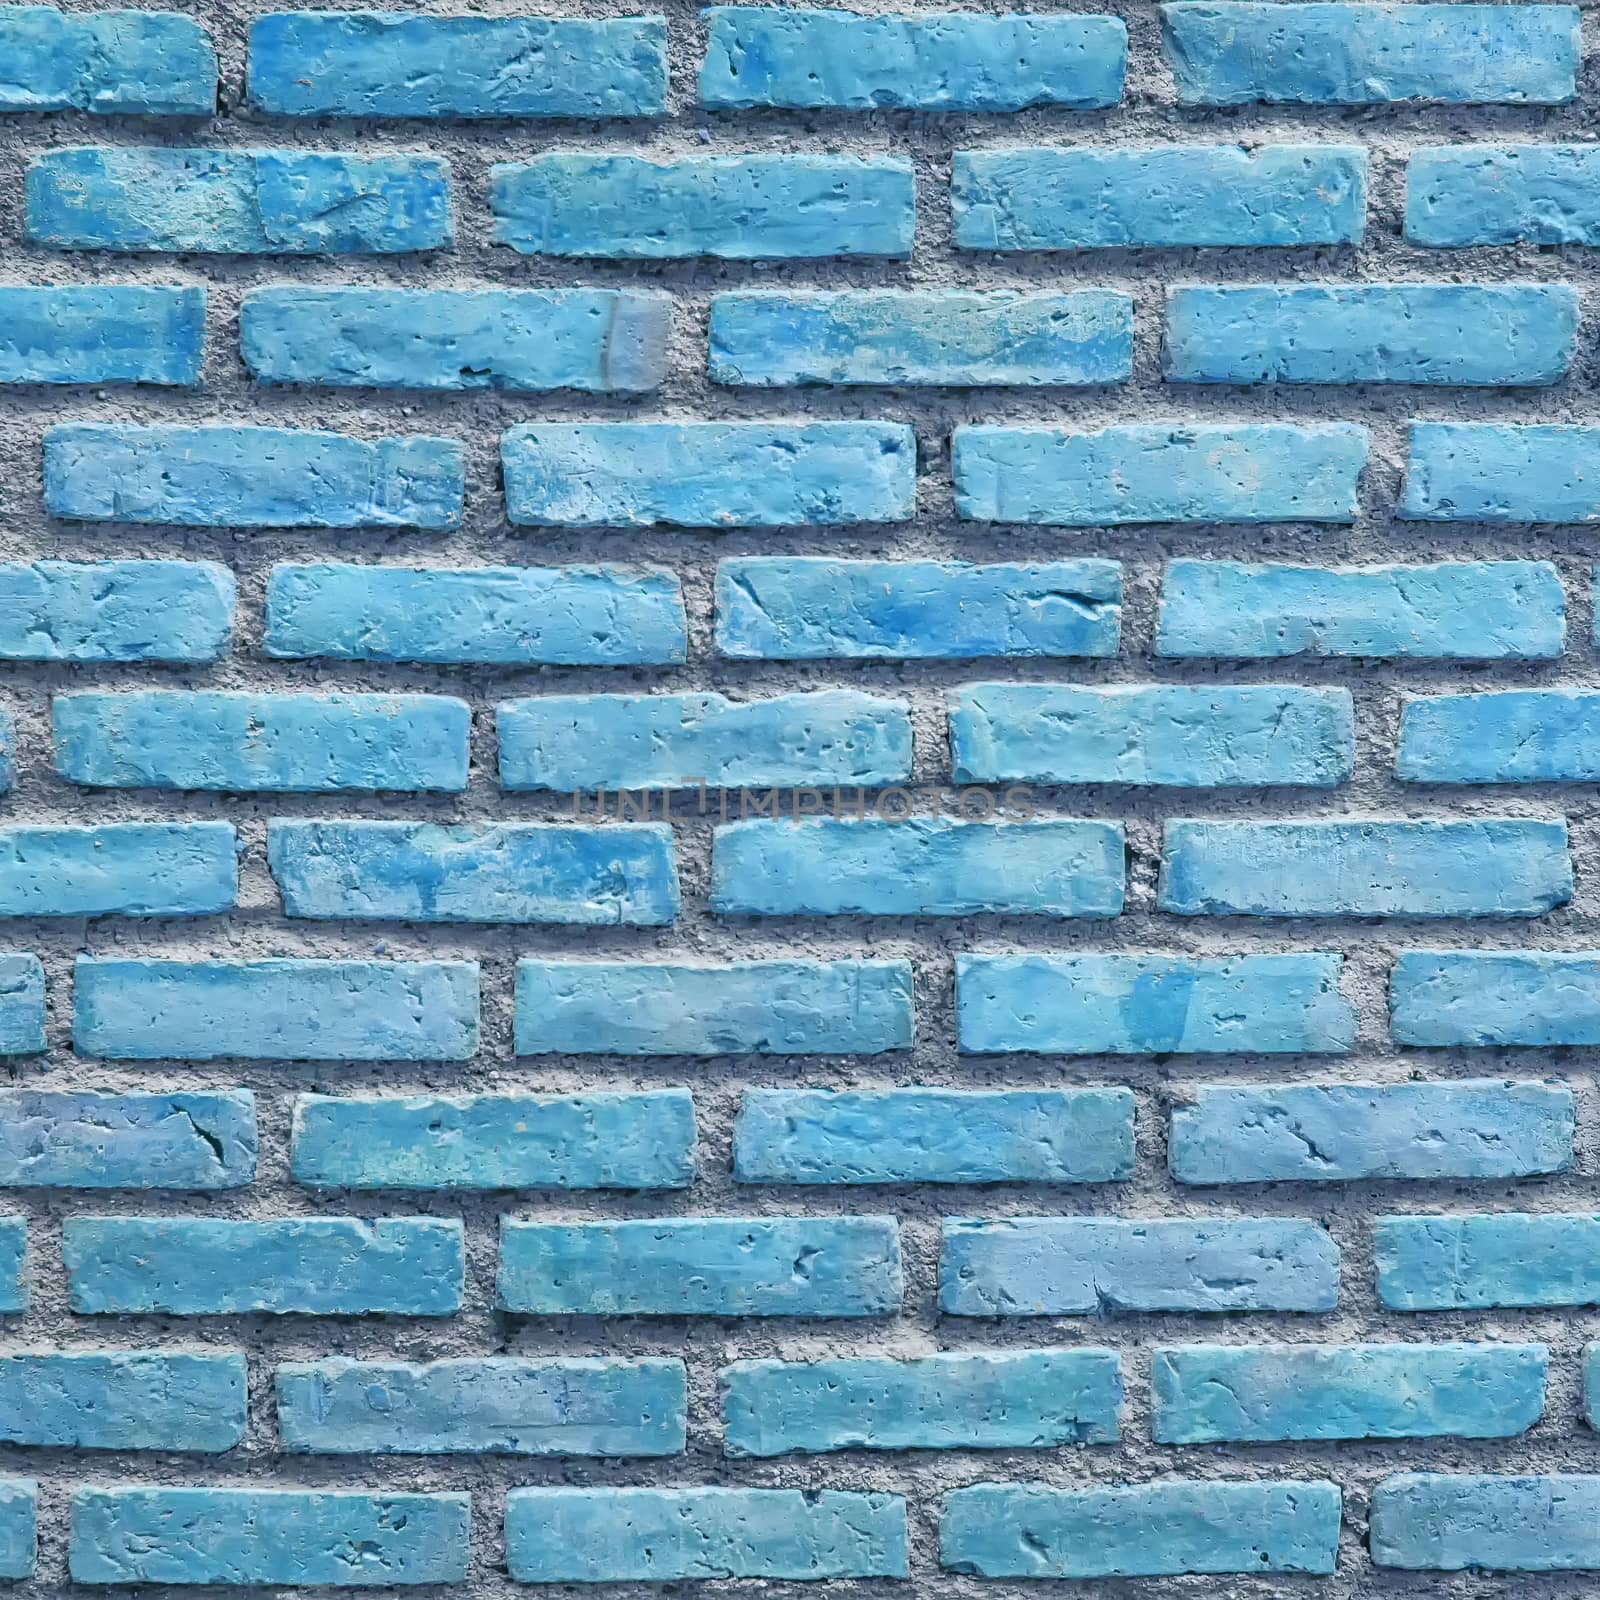 Background of brick wall texture.